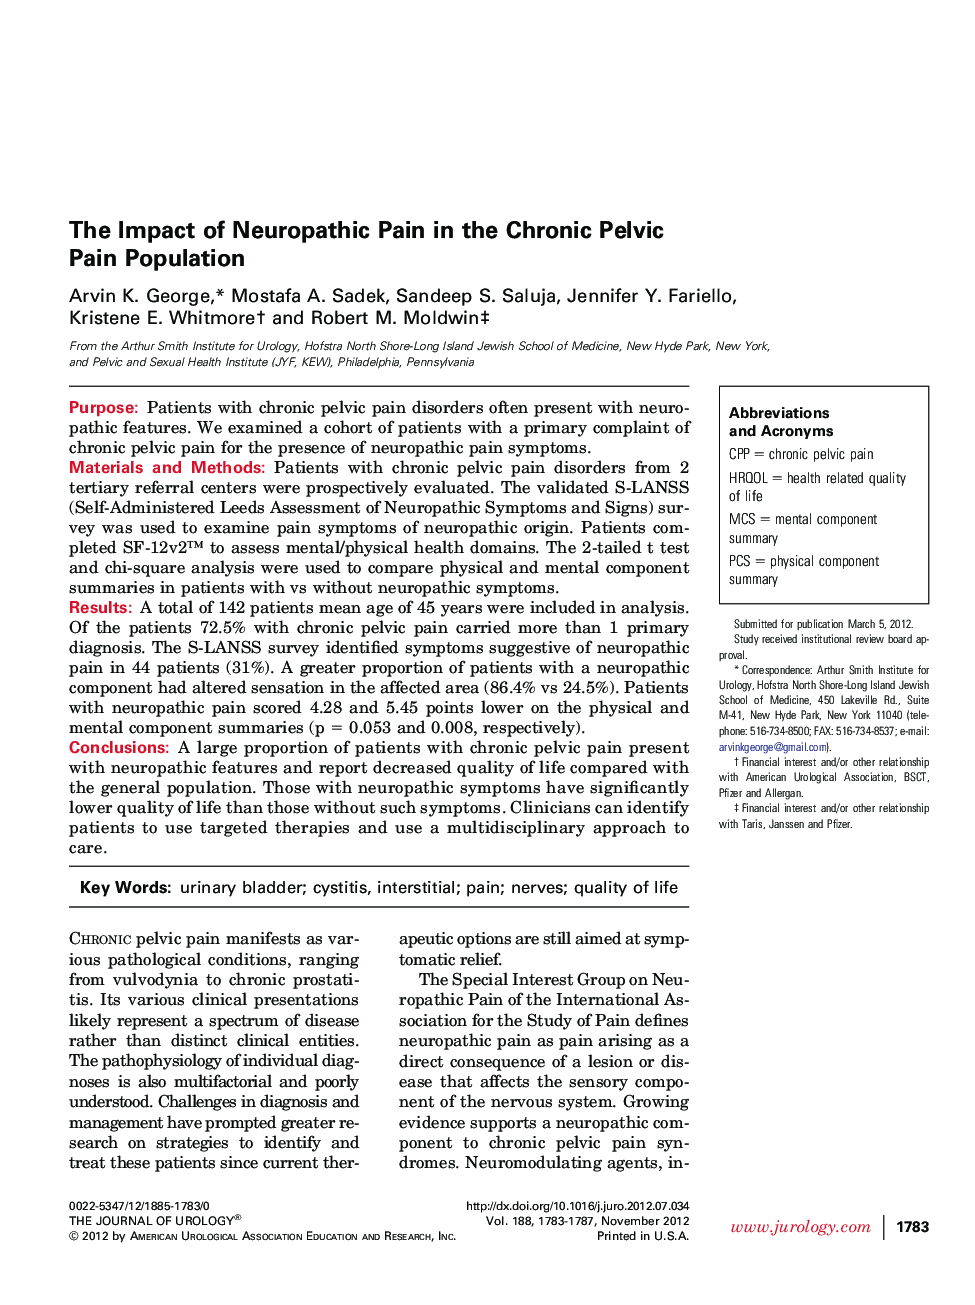 The Impact of Neuropathic Pain in the Chronic Pelvic Pain Population